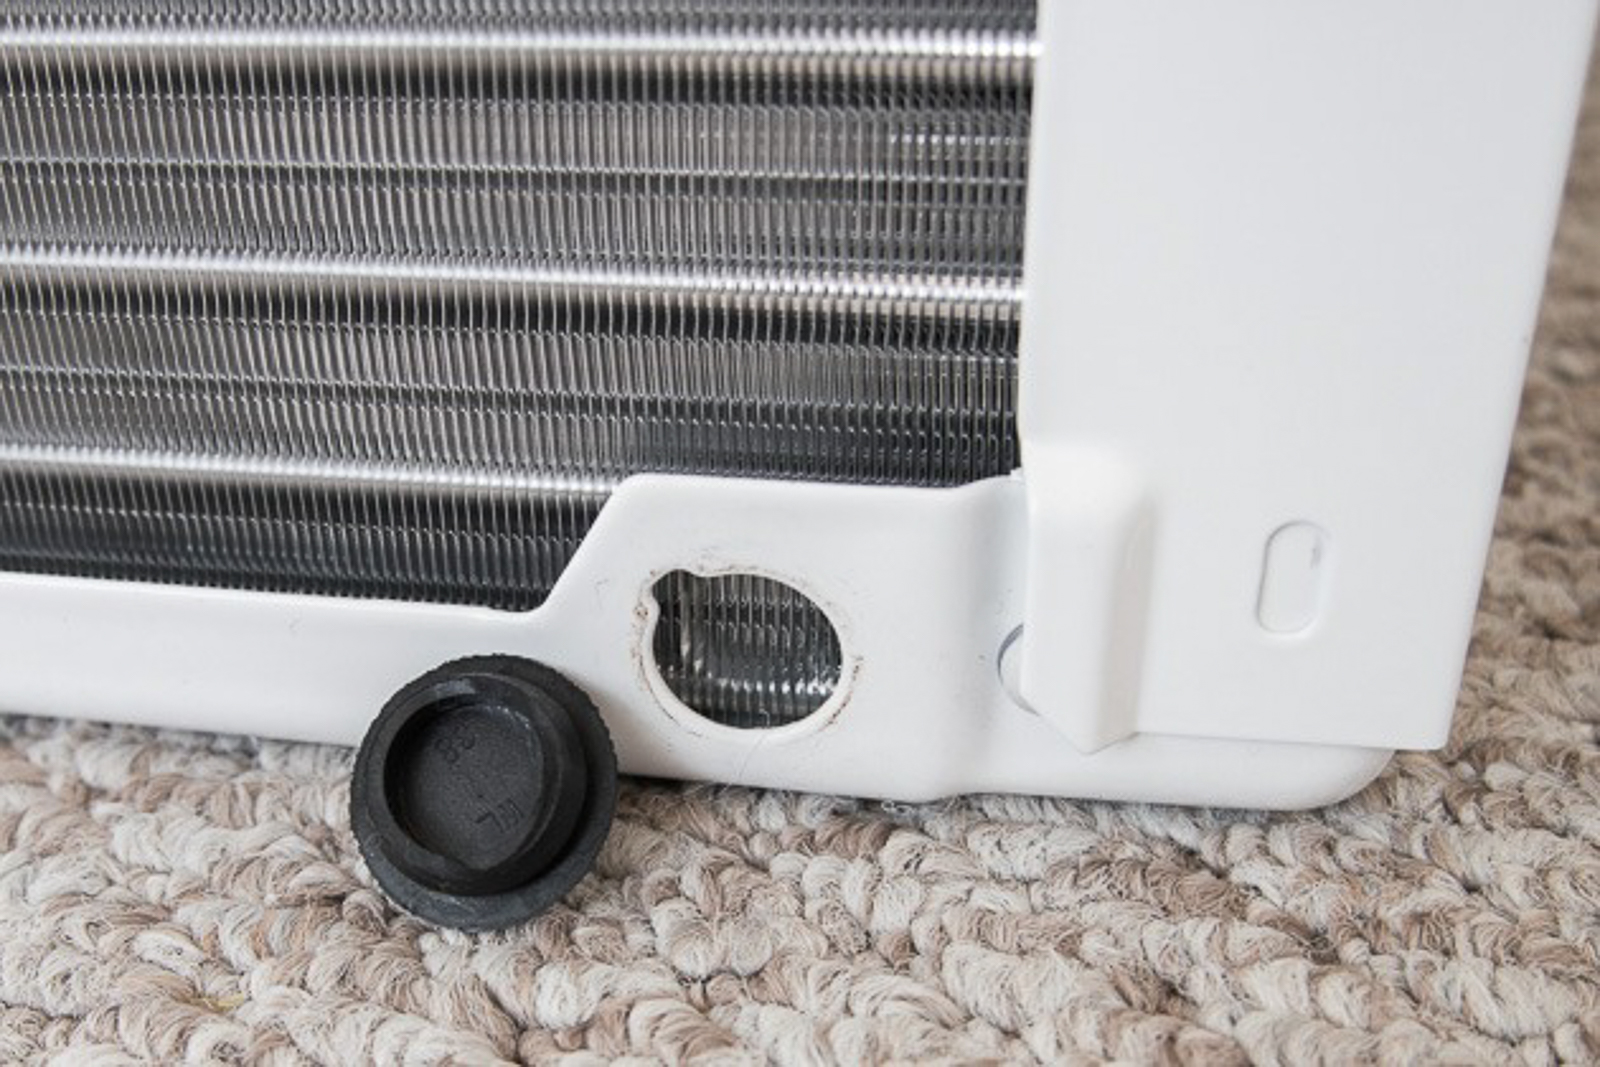 The best air conditioner